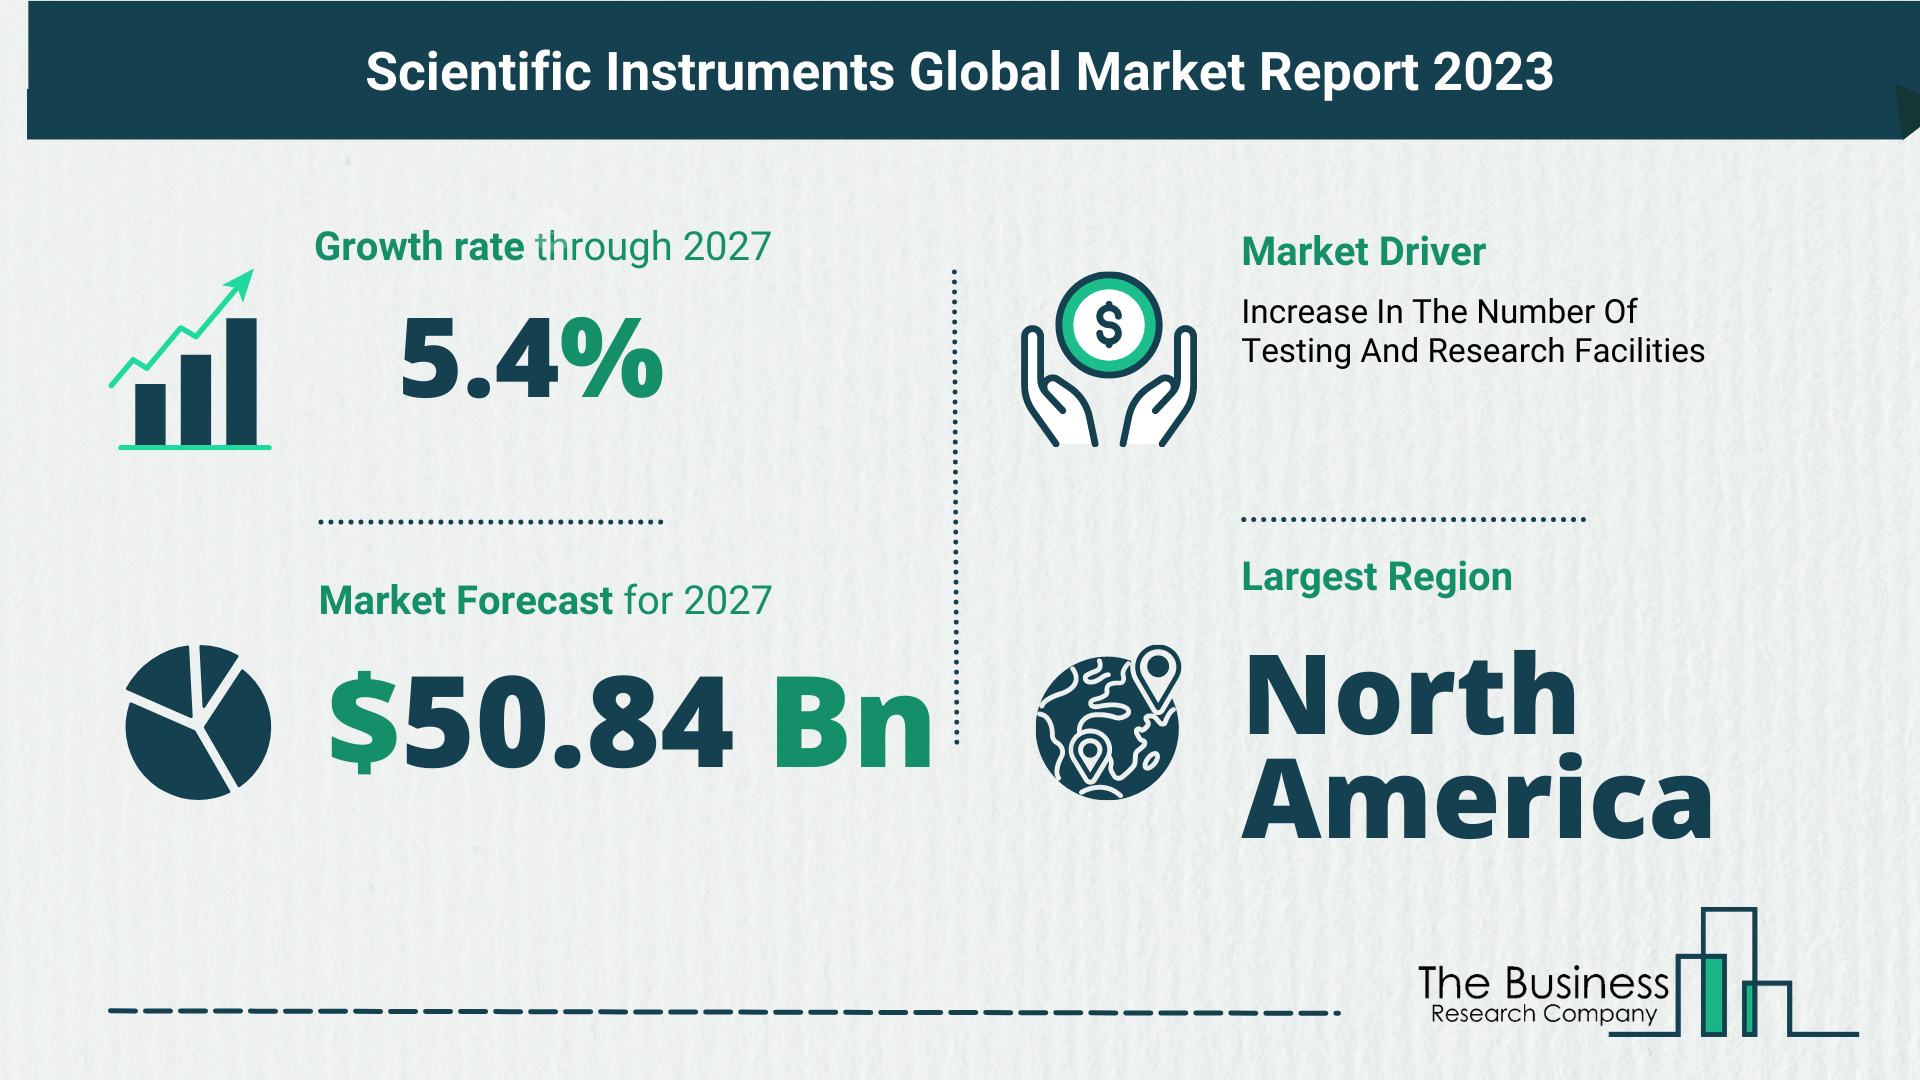 Global Scientific Instruments Market Analysis 2023: Size, Share, And Key Trends